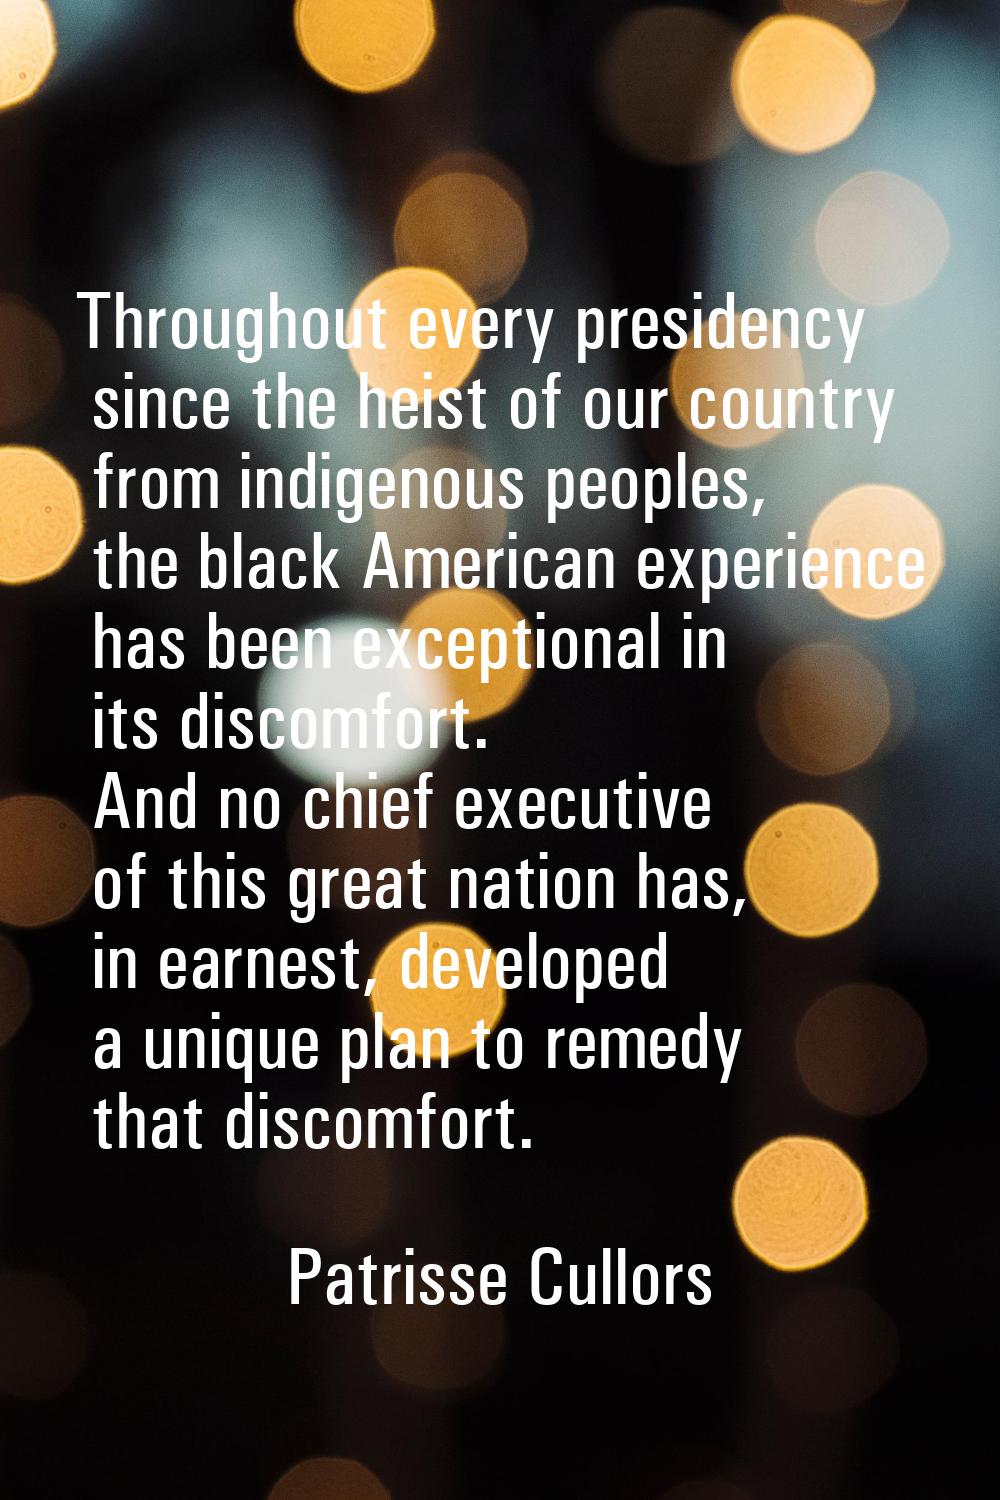 Throughout every presidency since the heist of our country from indigenous peoples, the black Ameri